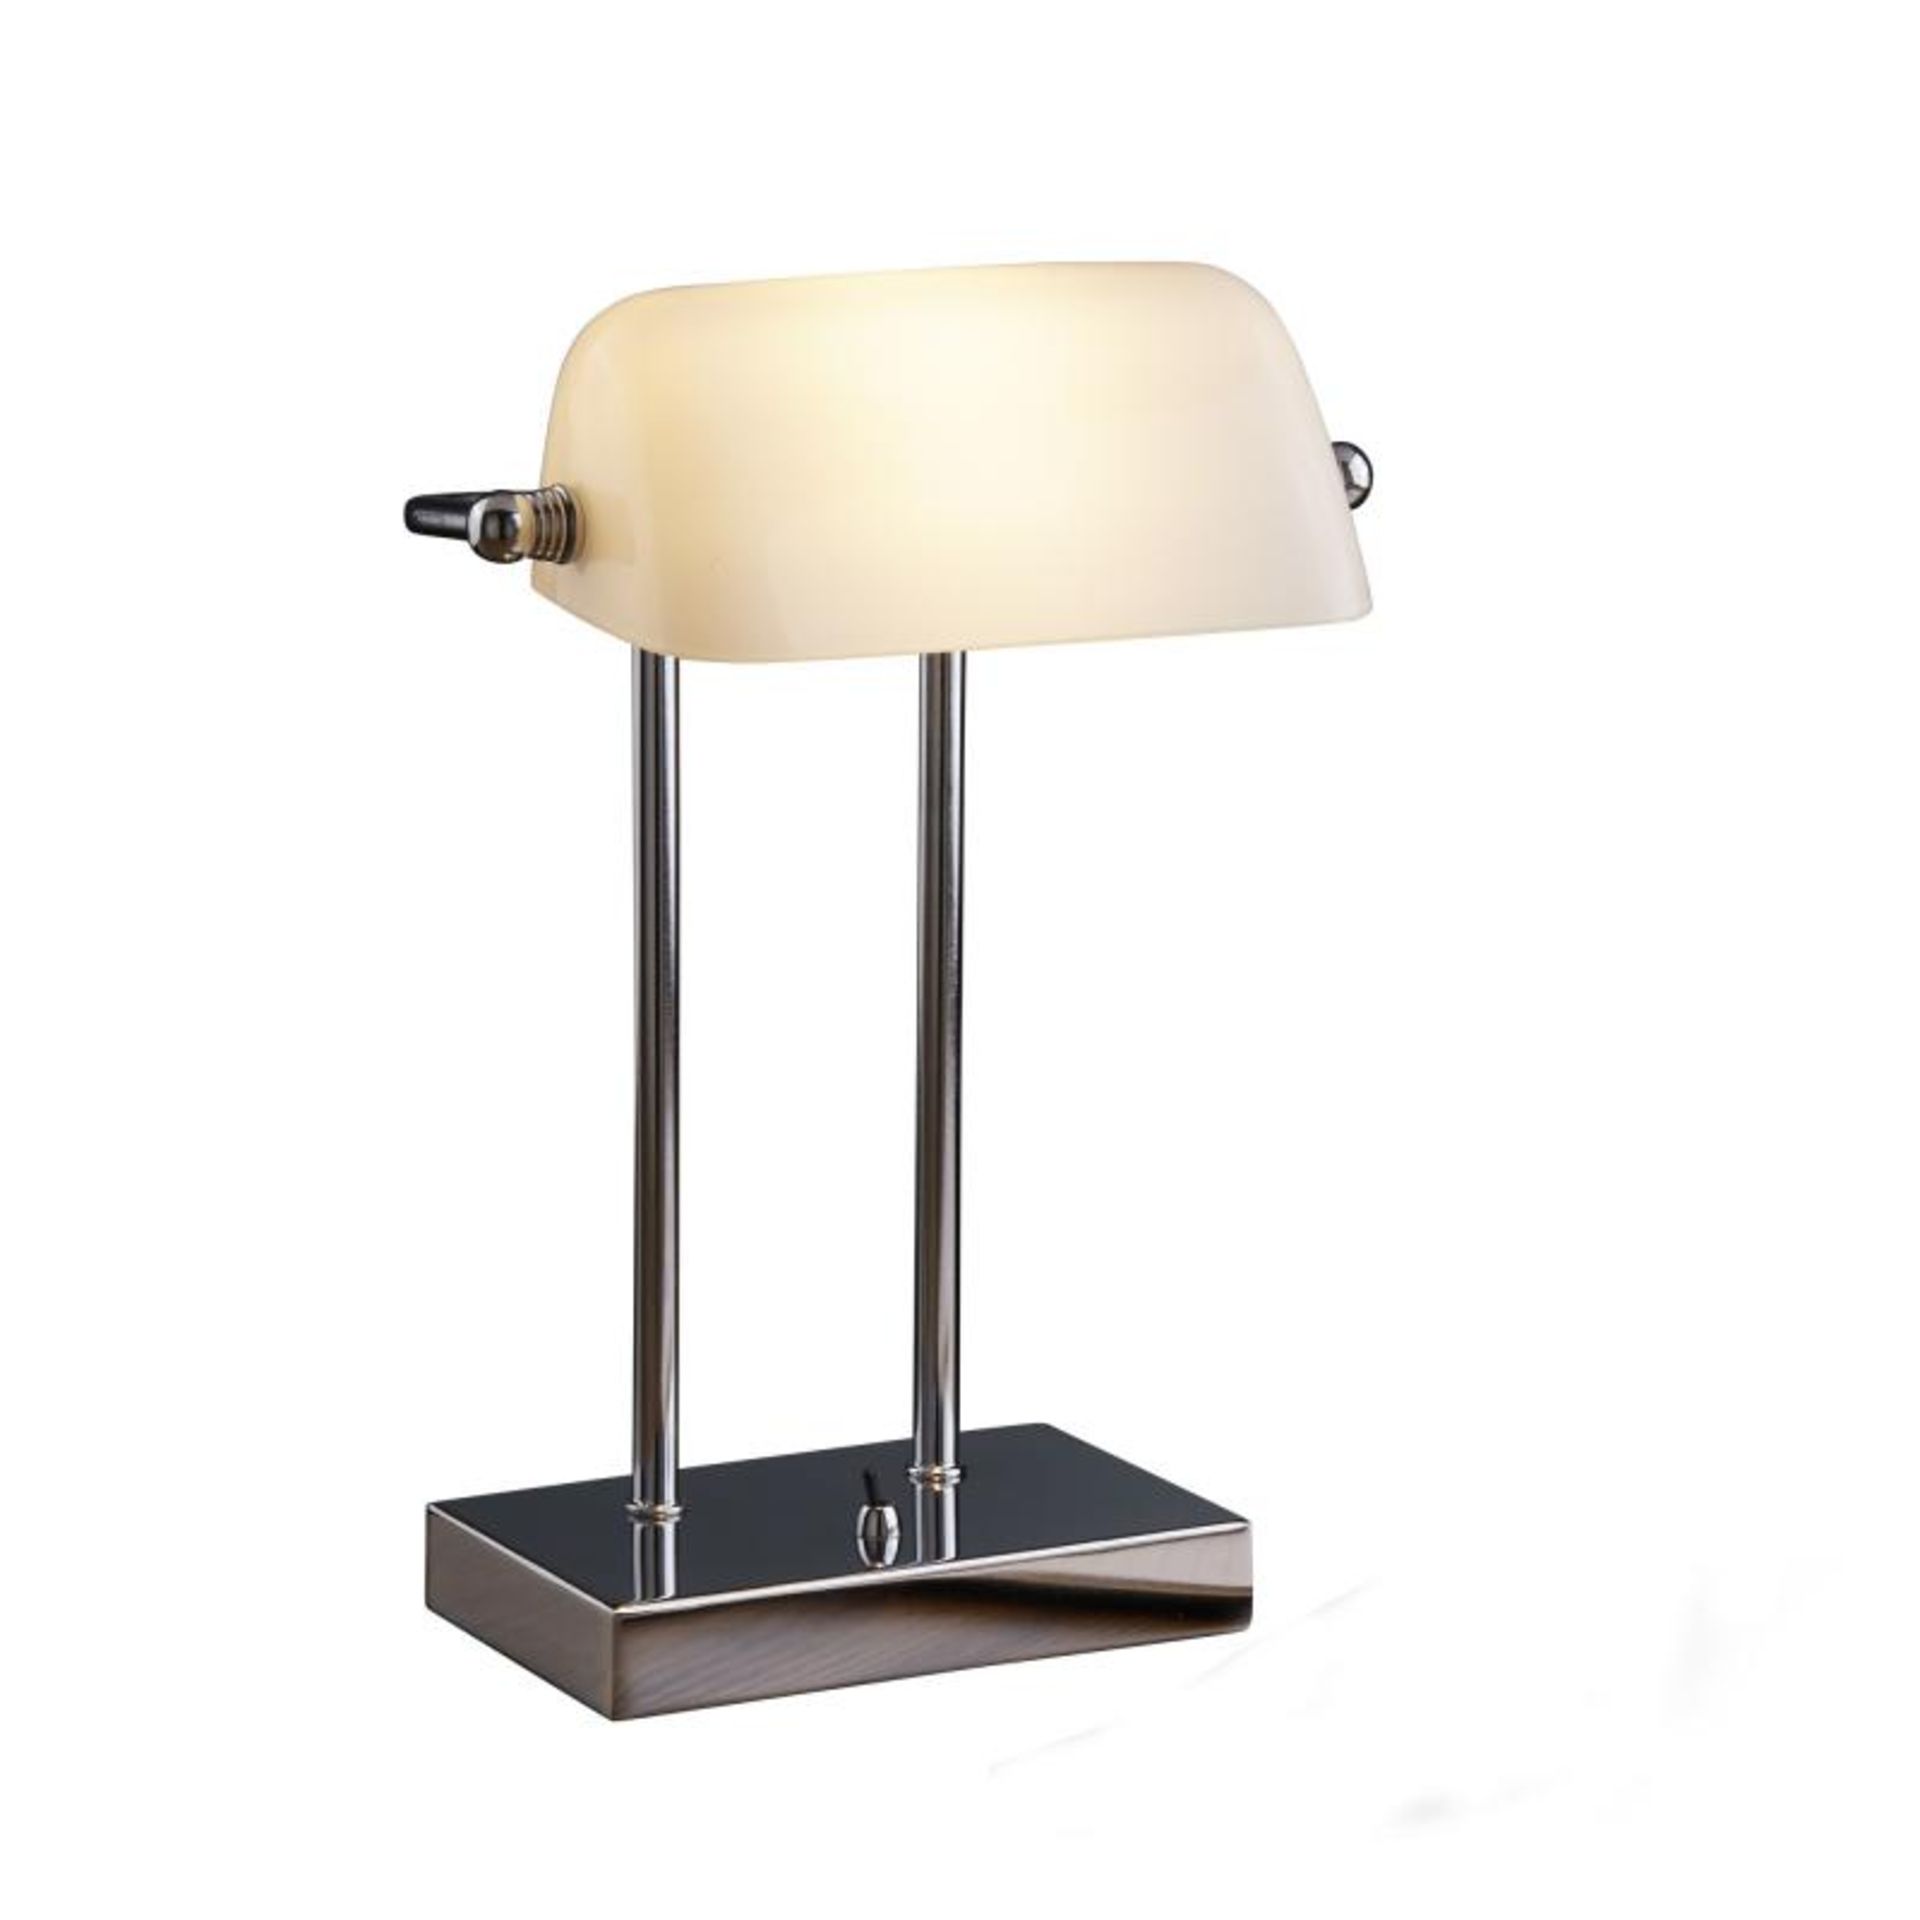 1 x Bankers Style Chrome Table Lamp With White Glass Shade - New Boxed Stock - CL323 - Ref: 1200CC / - Image 3 of 3